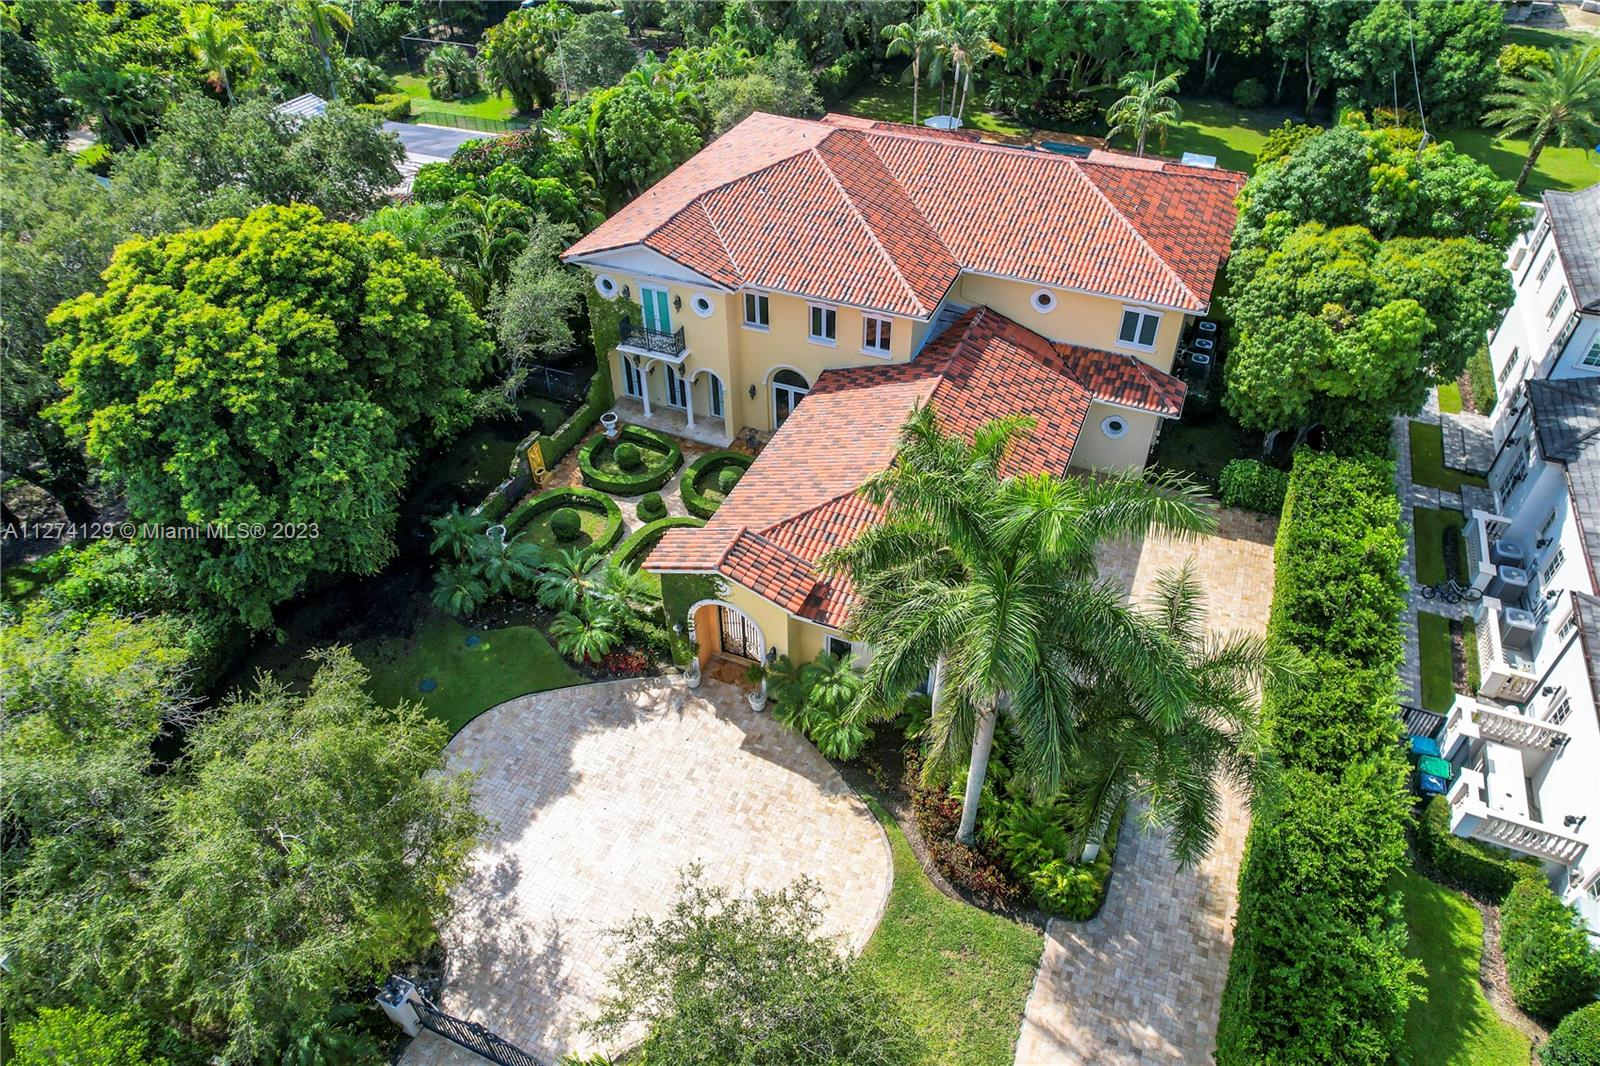 Exquisite, one-of-a-kind Estate located on a quiet cul-de-sac in North Pinecrest. Architecturally designed to perfection by Angel Berisiartu. This smarthome features soaring fresco ceilings, marble floors, travertine, alabaster stone chandeliers, & iron works imported from Italy. Double barrel vaulted ceilings. The outdoor space boasts a topiary garden, 40FT Roman-style pool, & plenty of green space to relax or entertain. Exceptional millwork. A true chef's kitchen features Subzero, Uline, Thermador fuel range, & a Dacor oven. La Finestra doors & PGT windows. Elevator. All bedroom suites have walk-ins. Spacious 4-car garage with motor court feature. Two estate worthy driveways. Click the virtual tour link to view video.